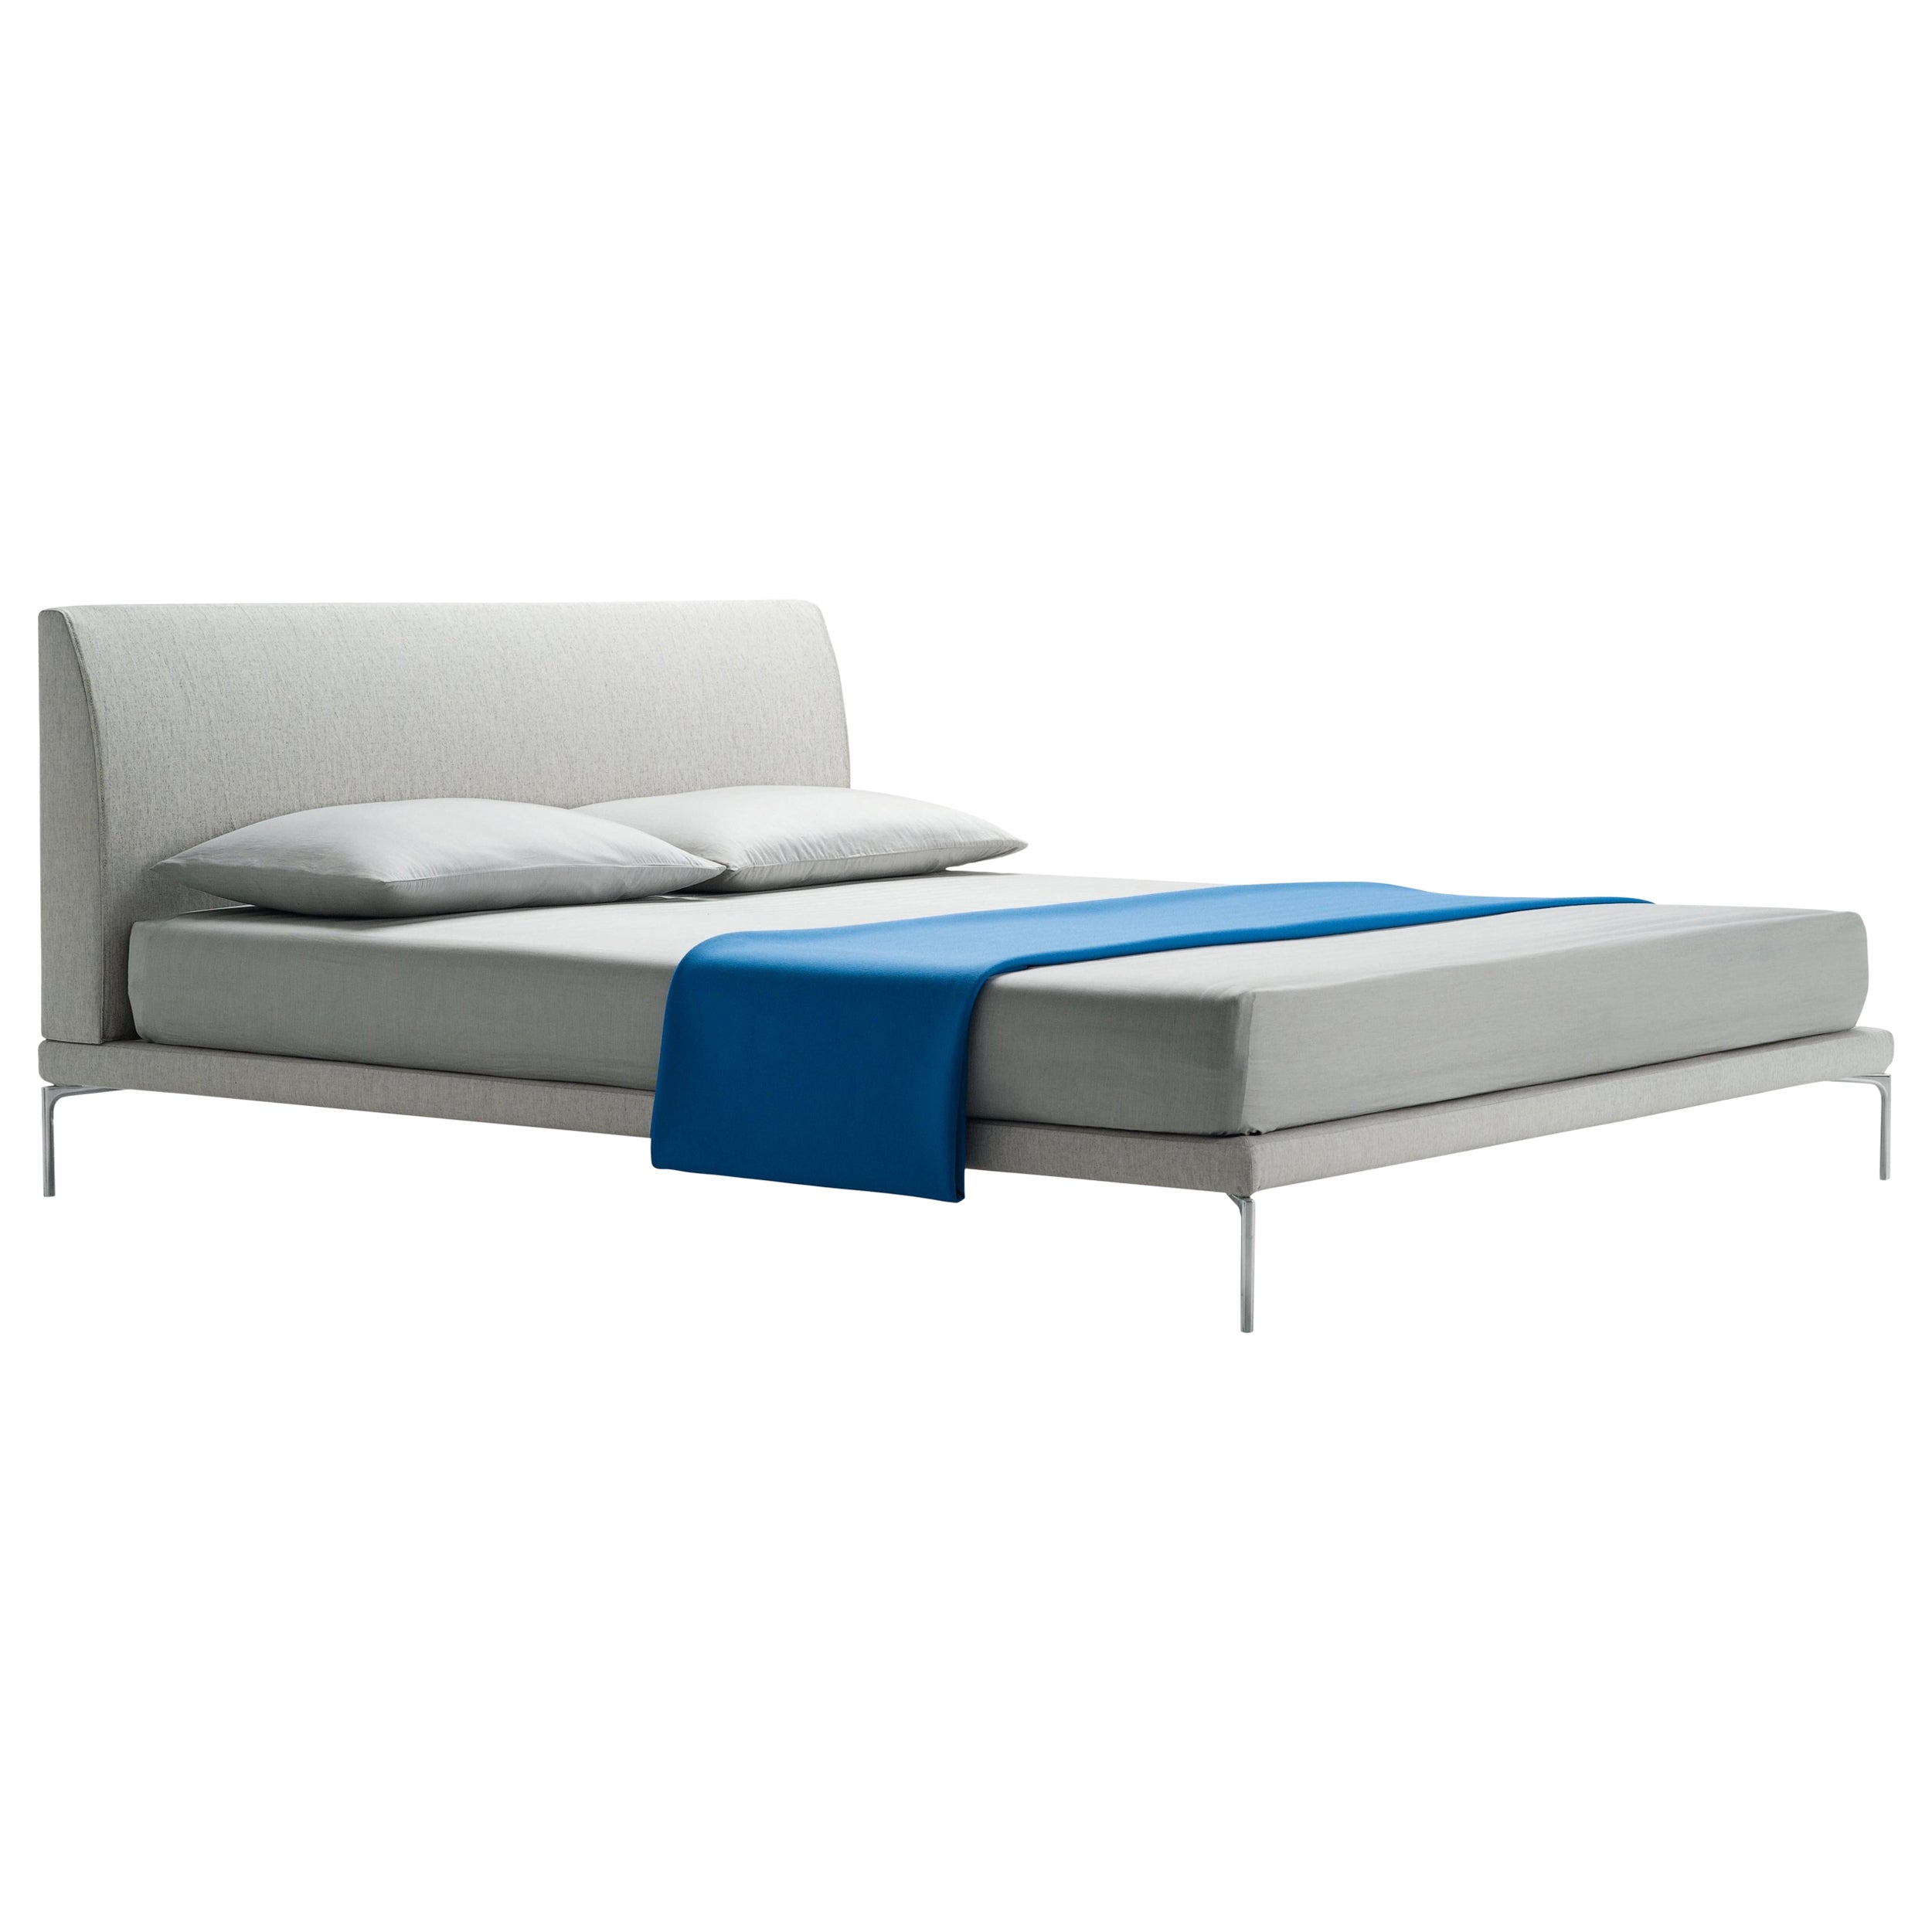 Zanotta Medium Talamo Bed with Separate Springings in Grey Upholstery For Sale